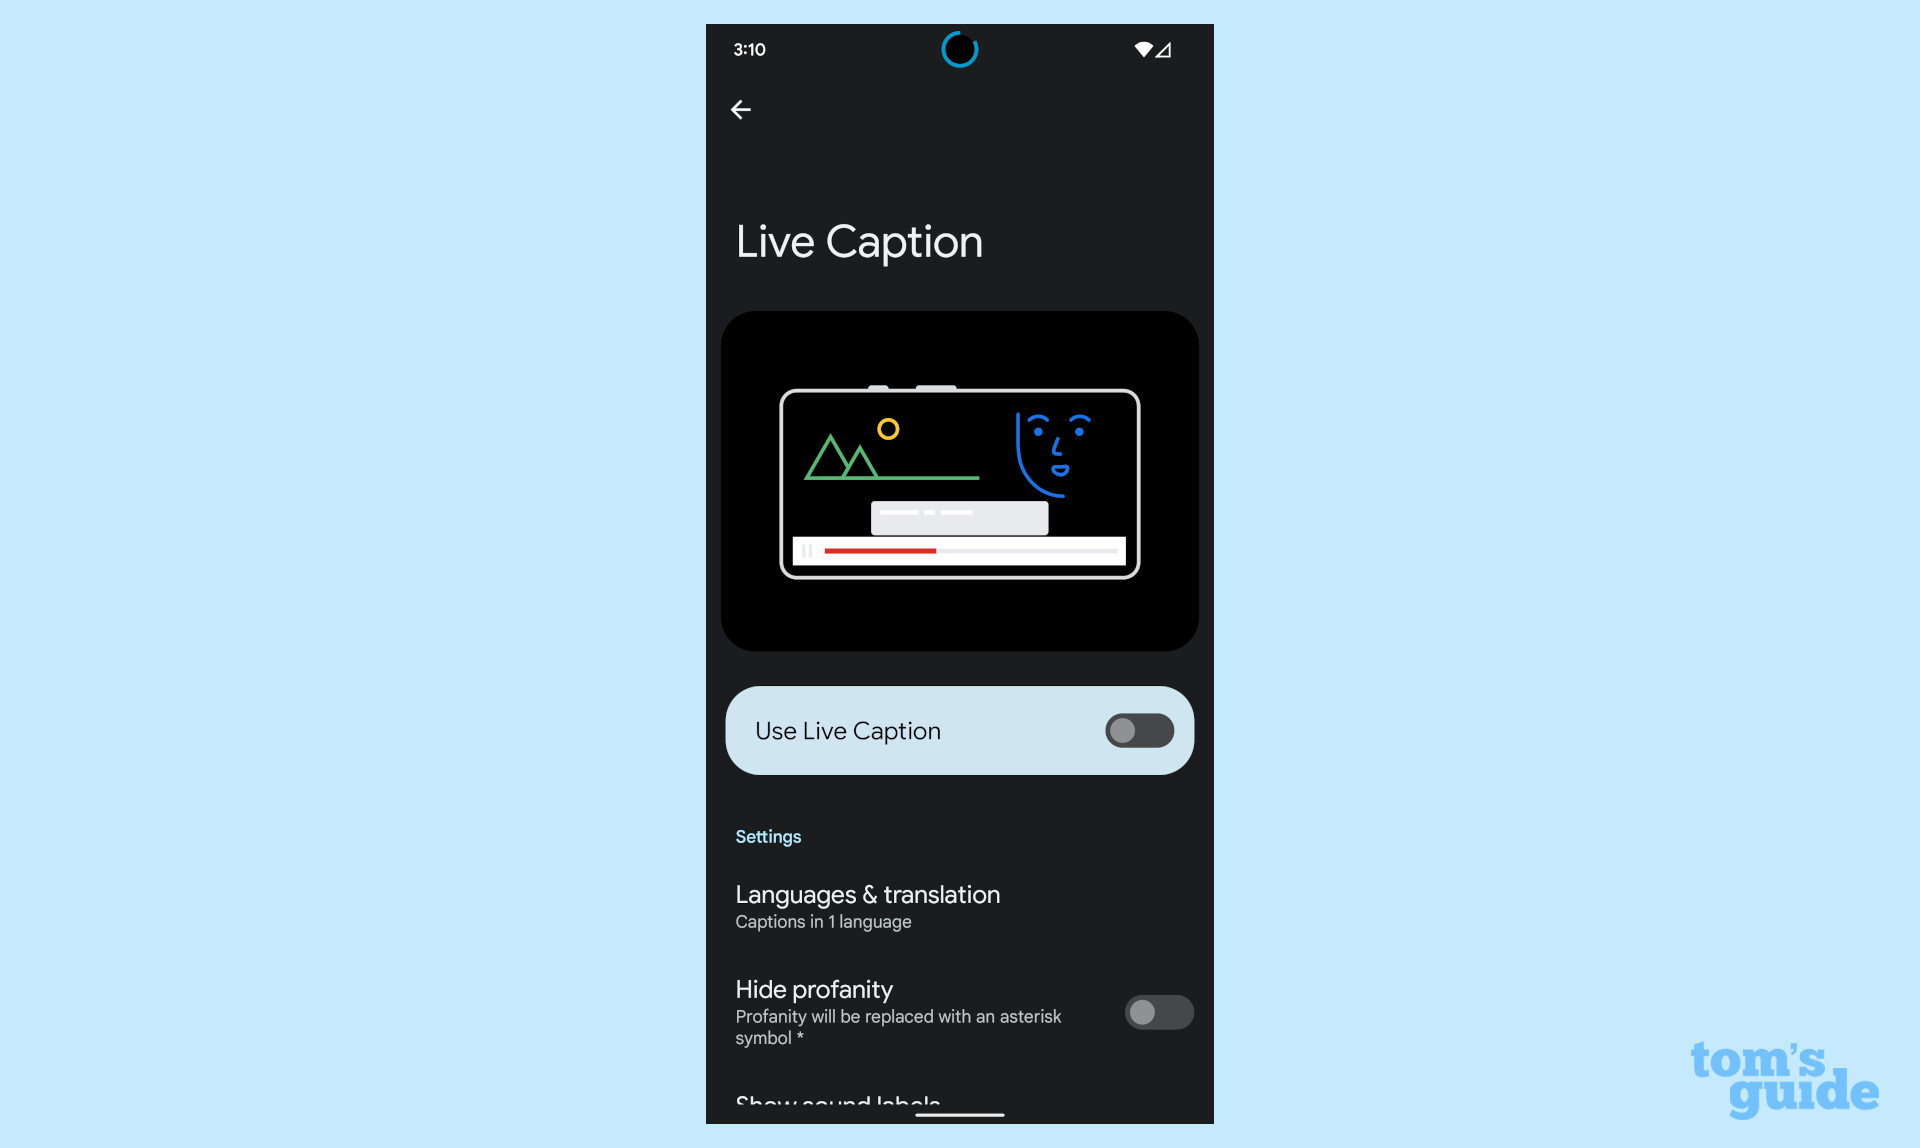 pixel 6 features to enable: live caption